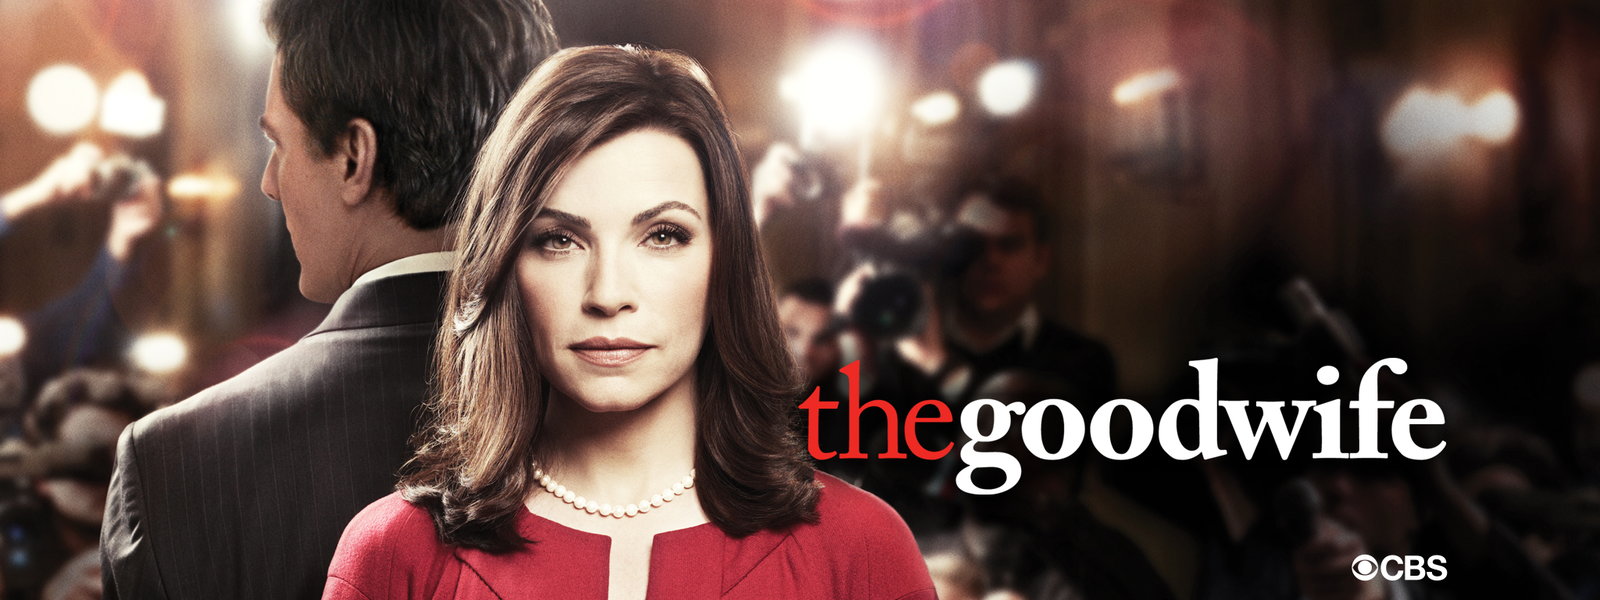 The Good Wife #13